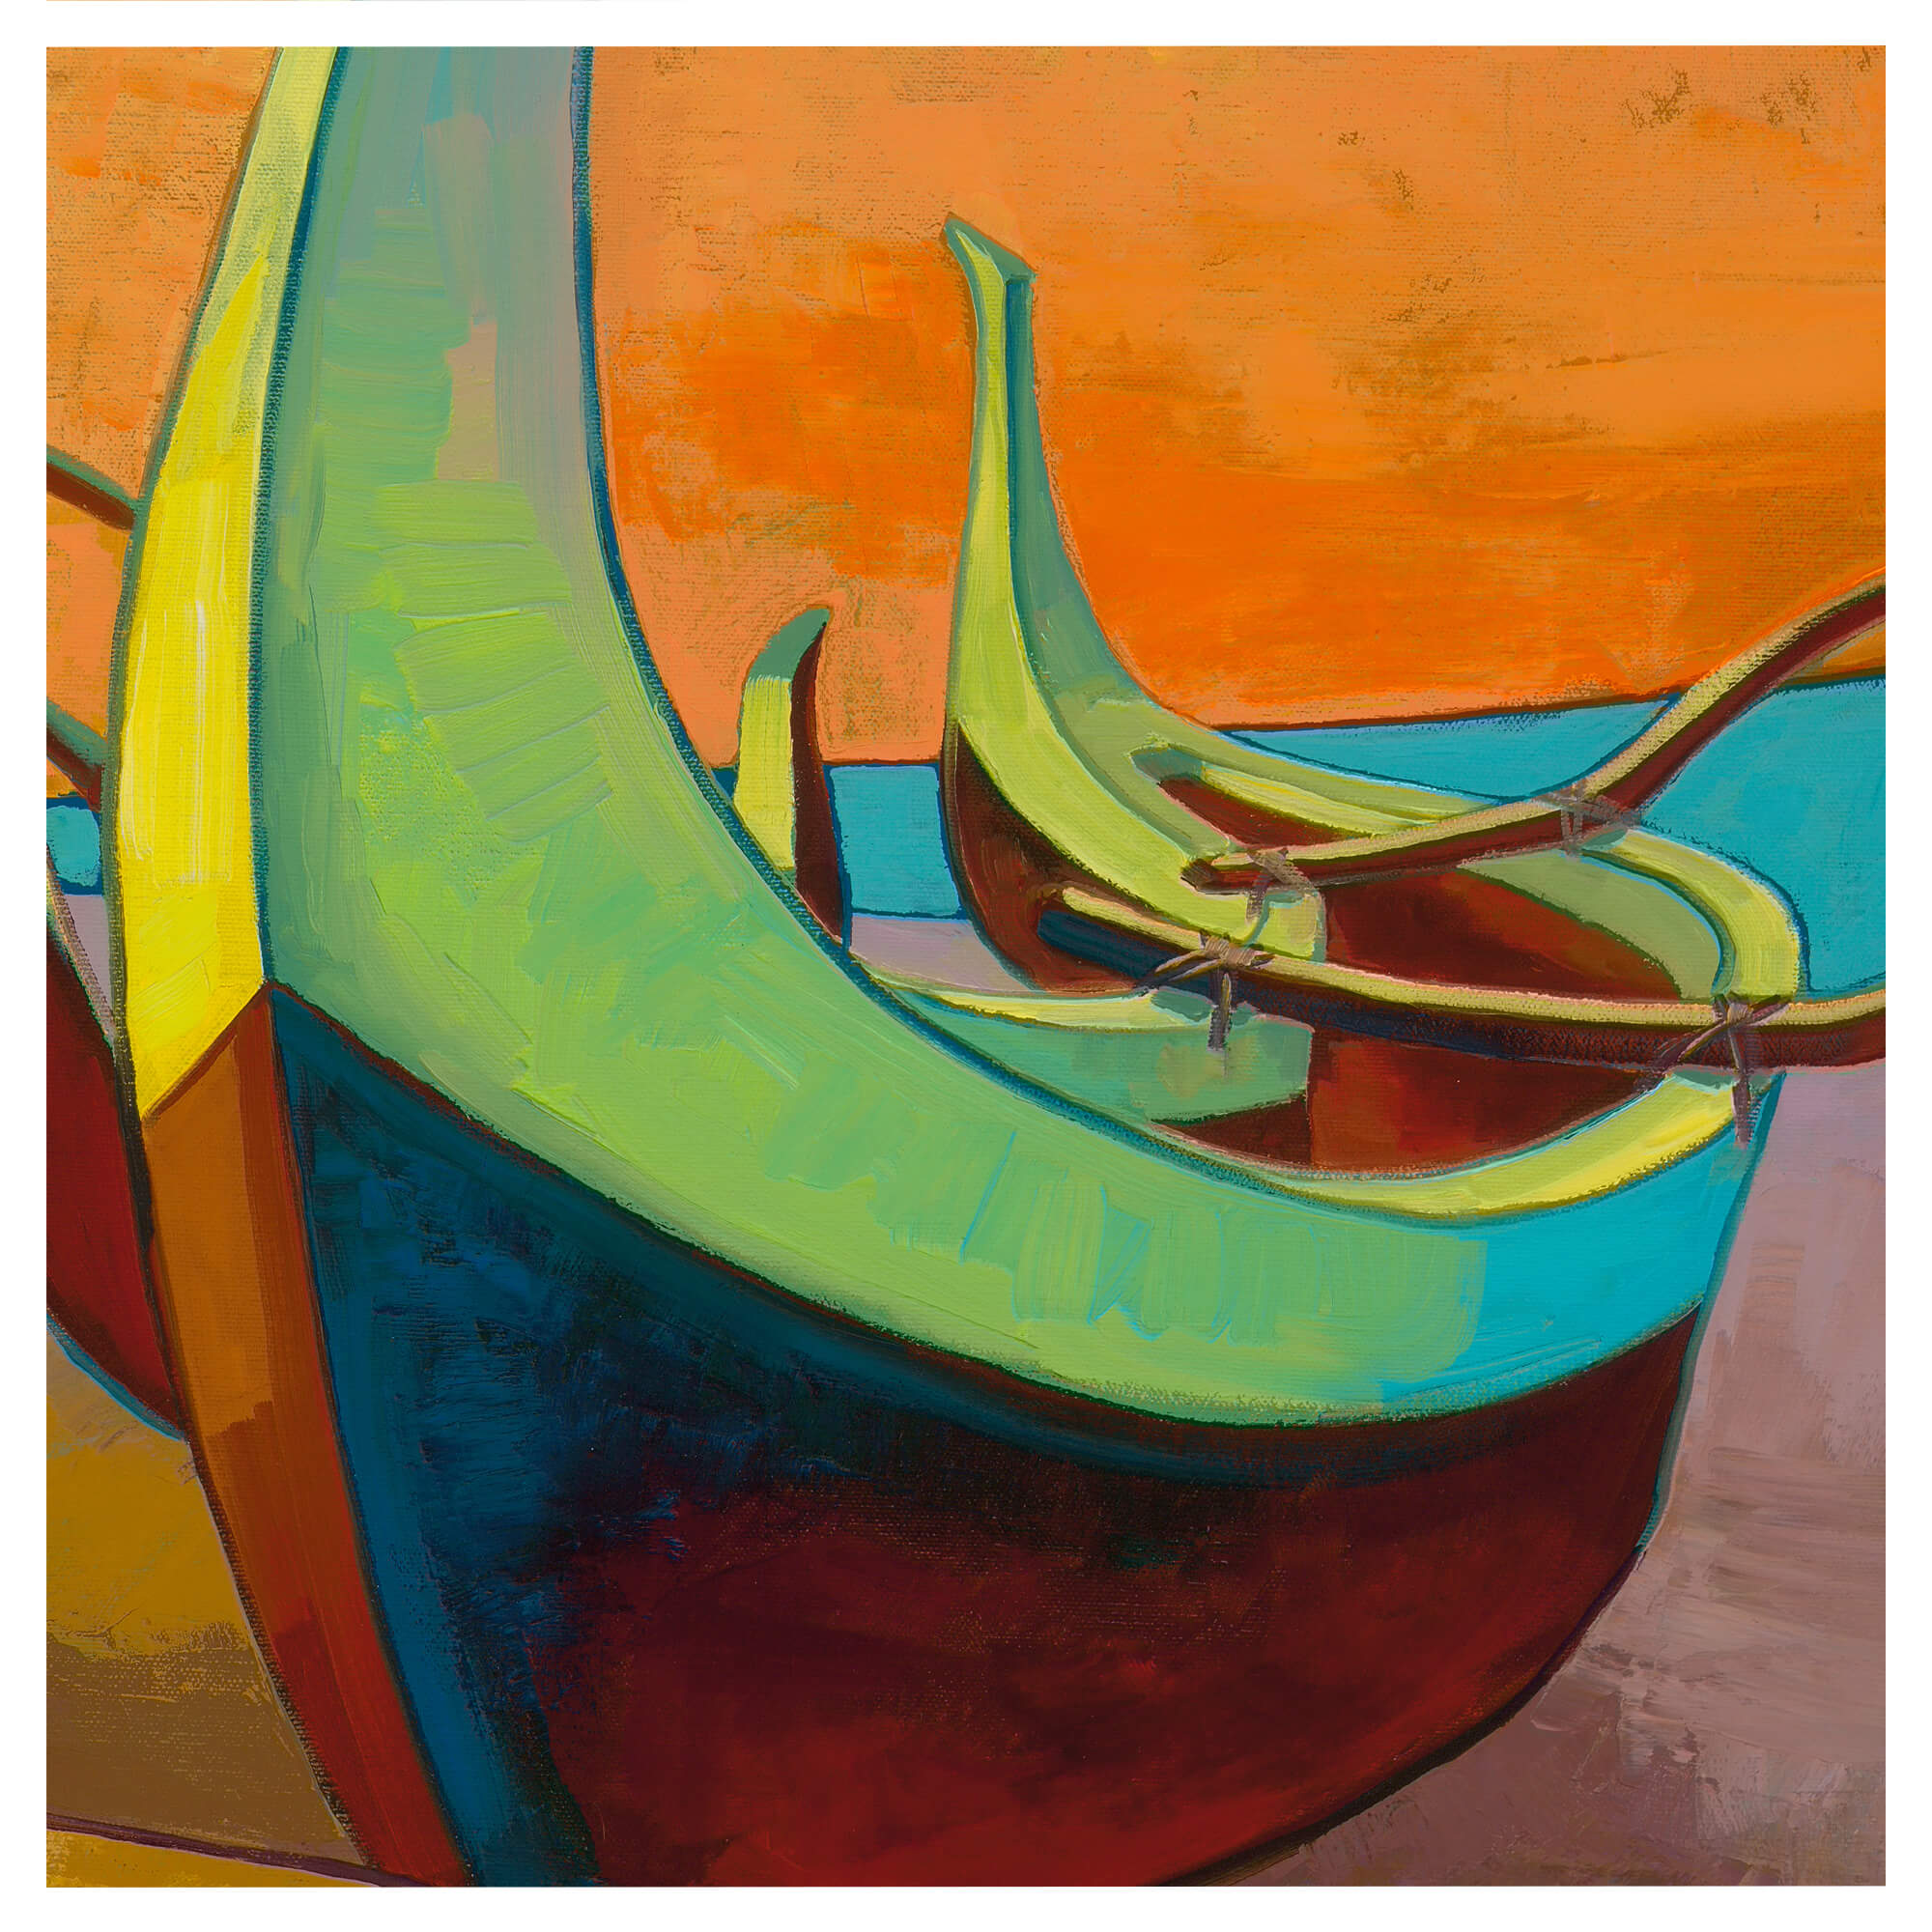 Curved boat by Hawaii artist Colin Redican